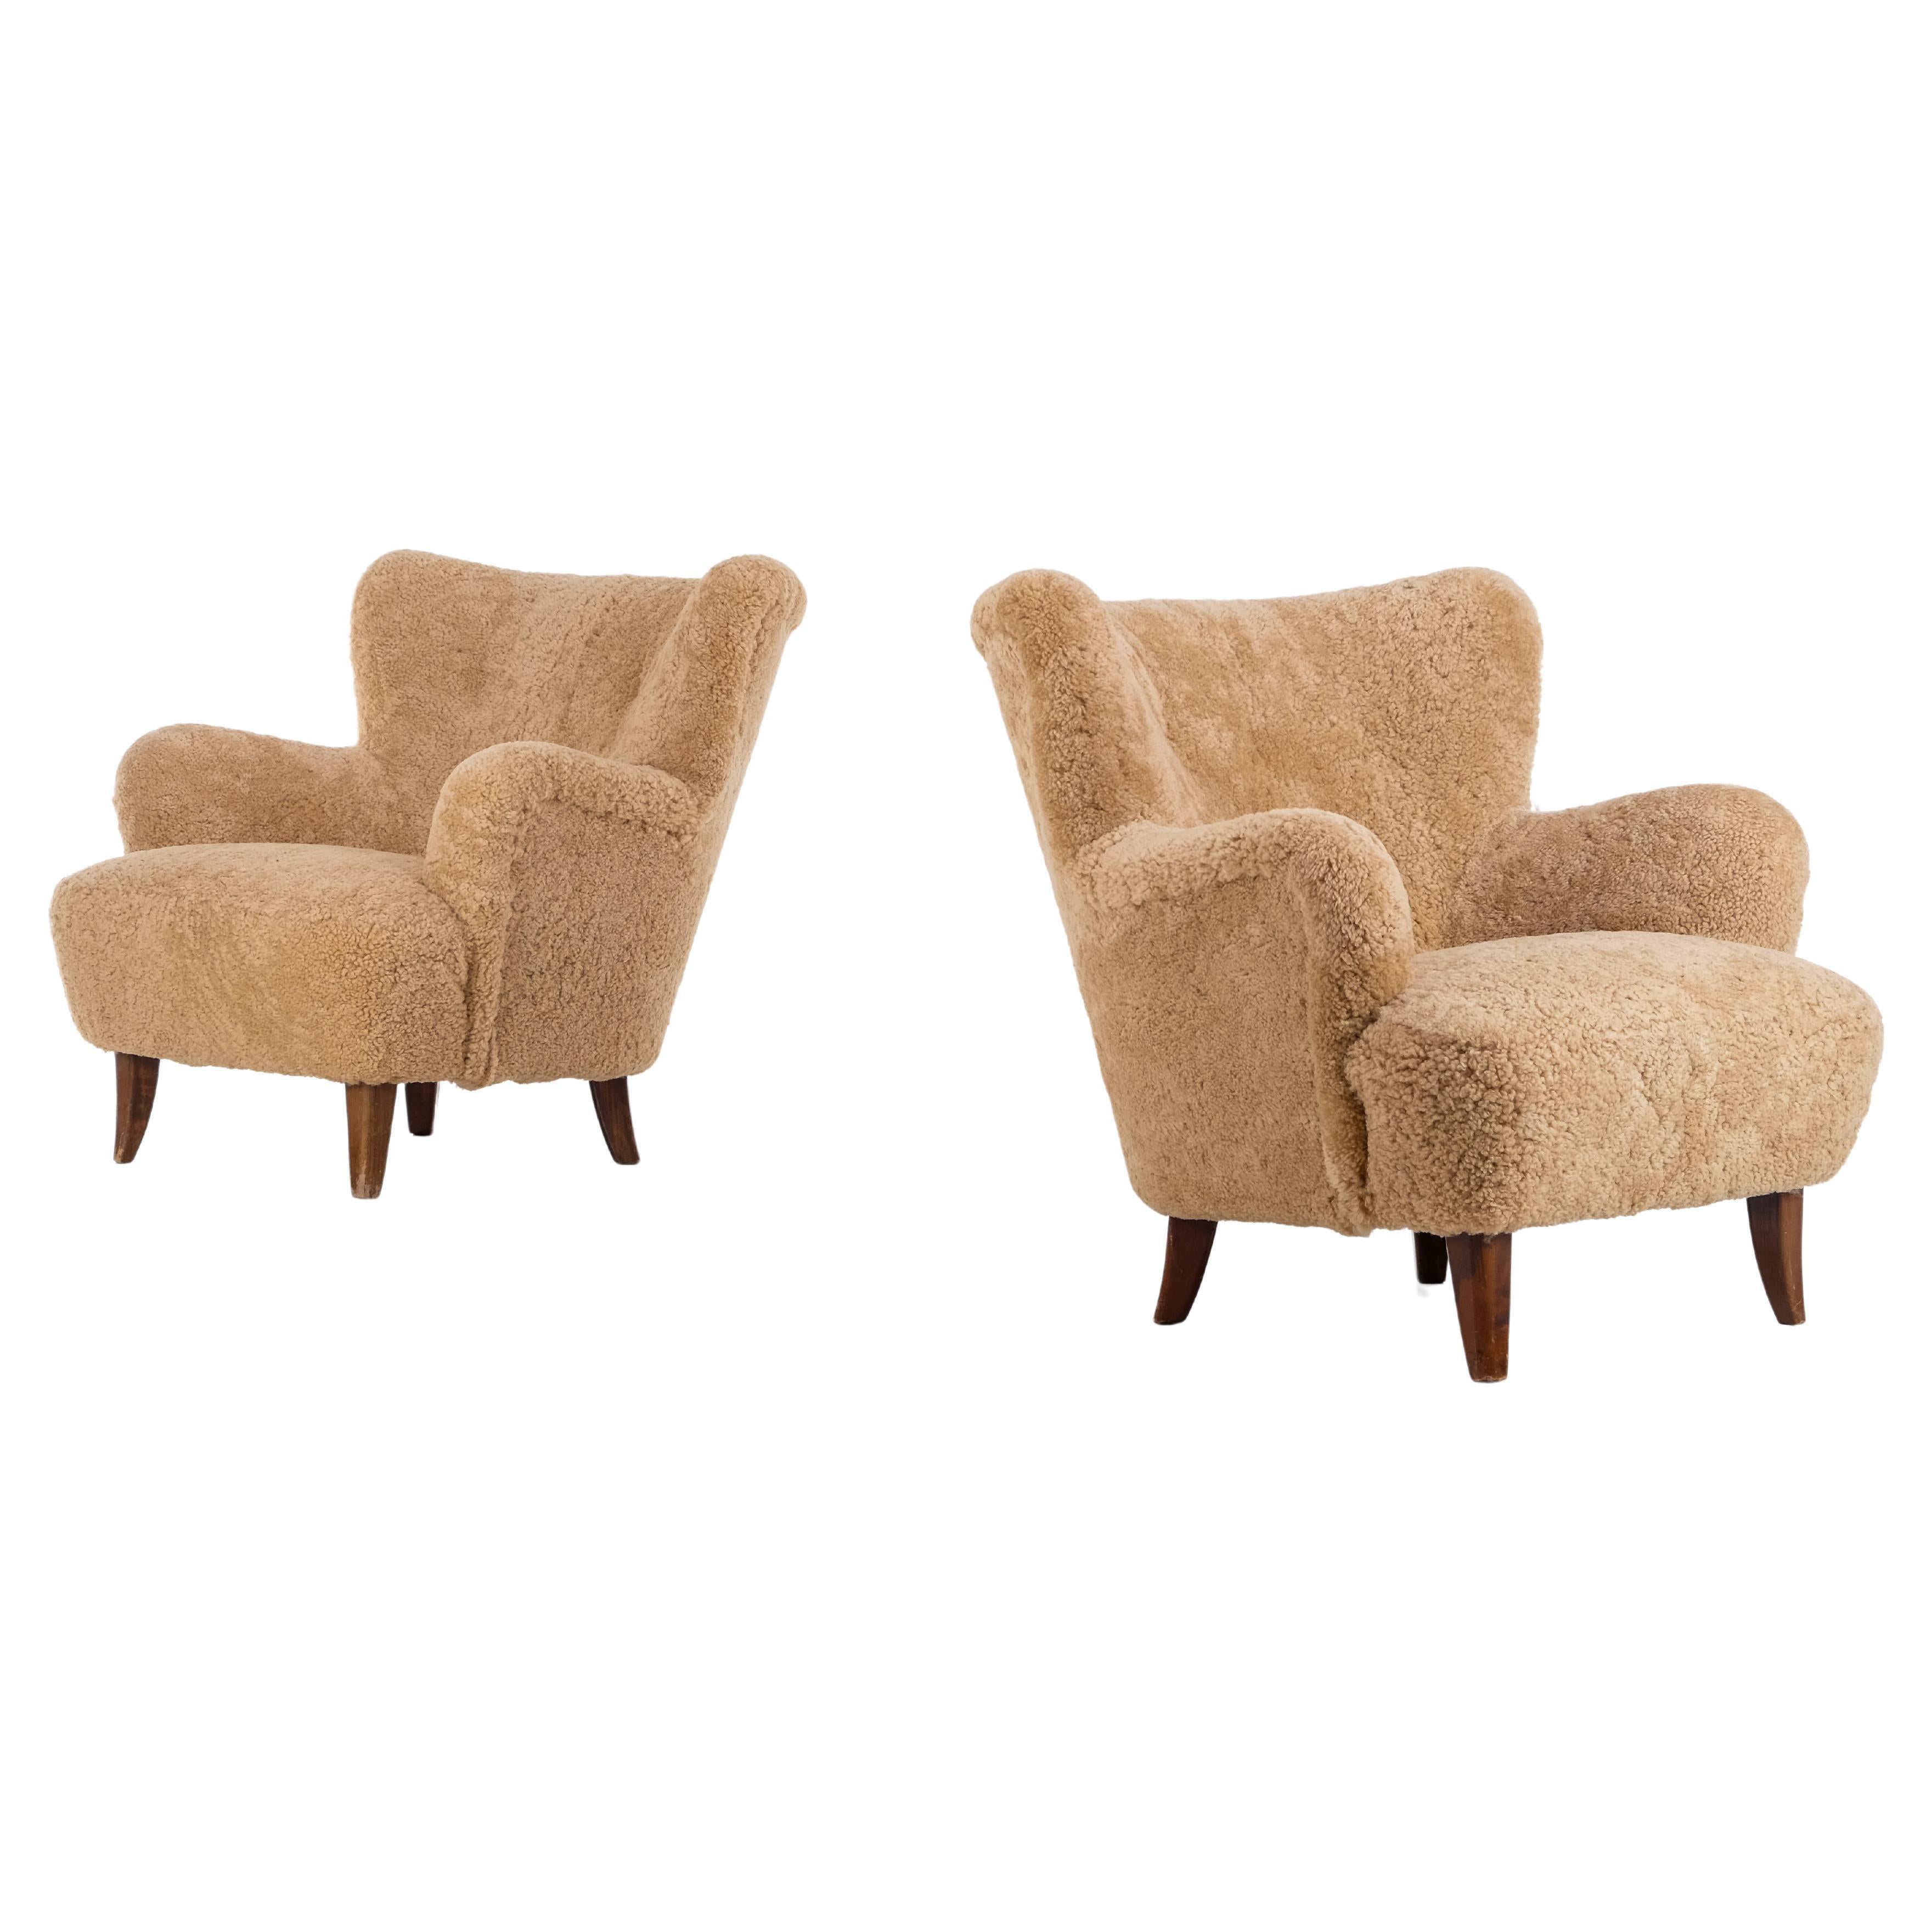 Pair of 'Laila' Armchair in sheepskin by Ilmari Lappalainen, Finland, 1950s For Sale